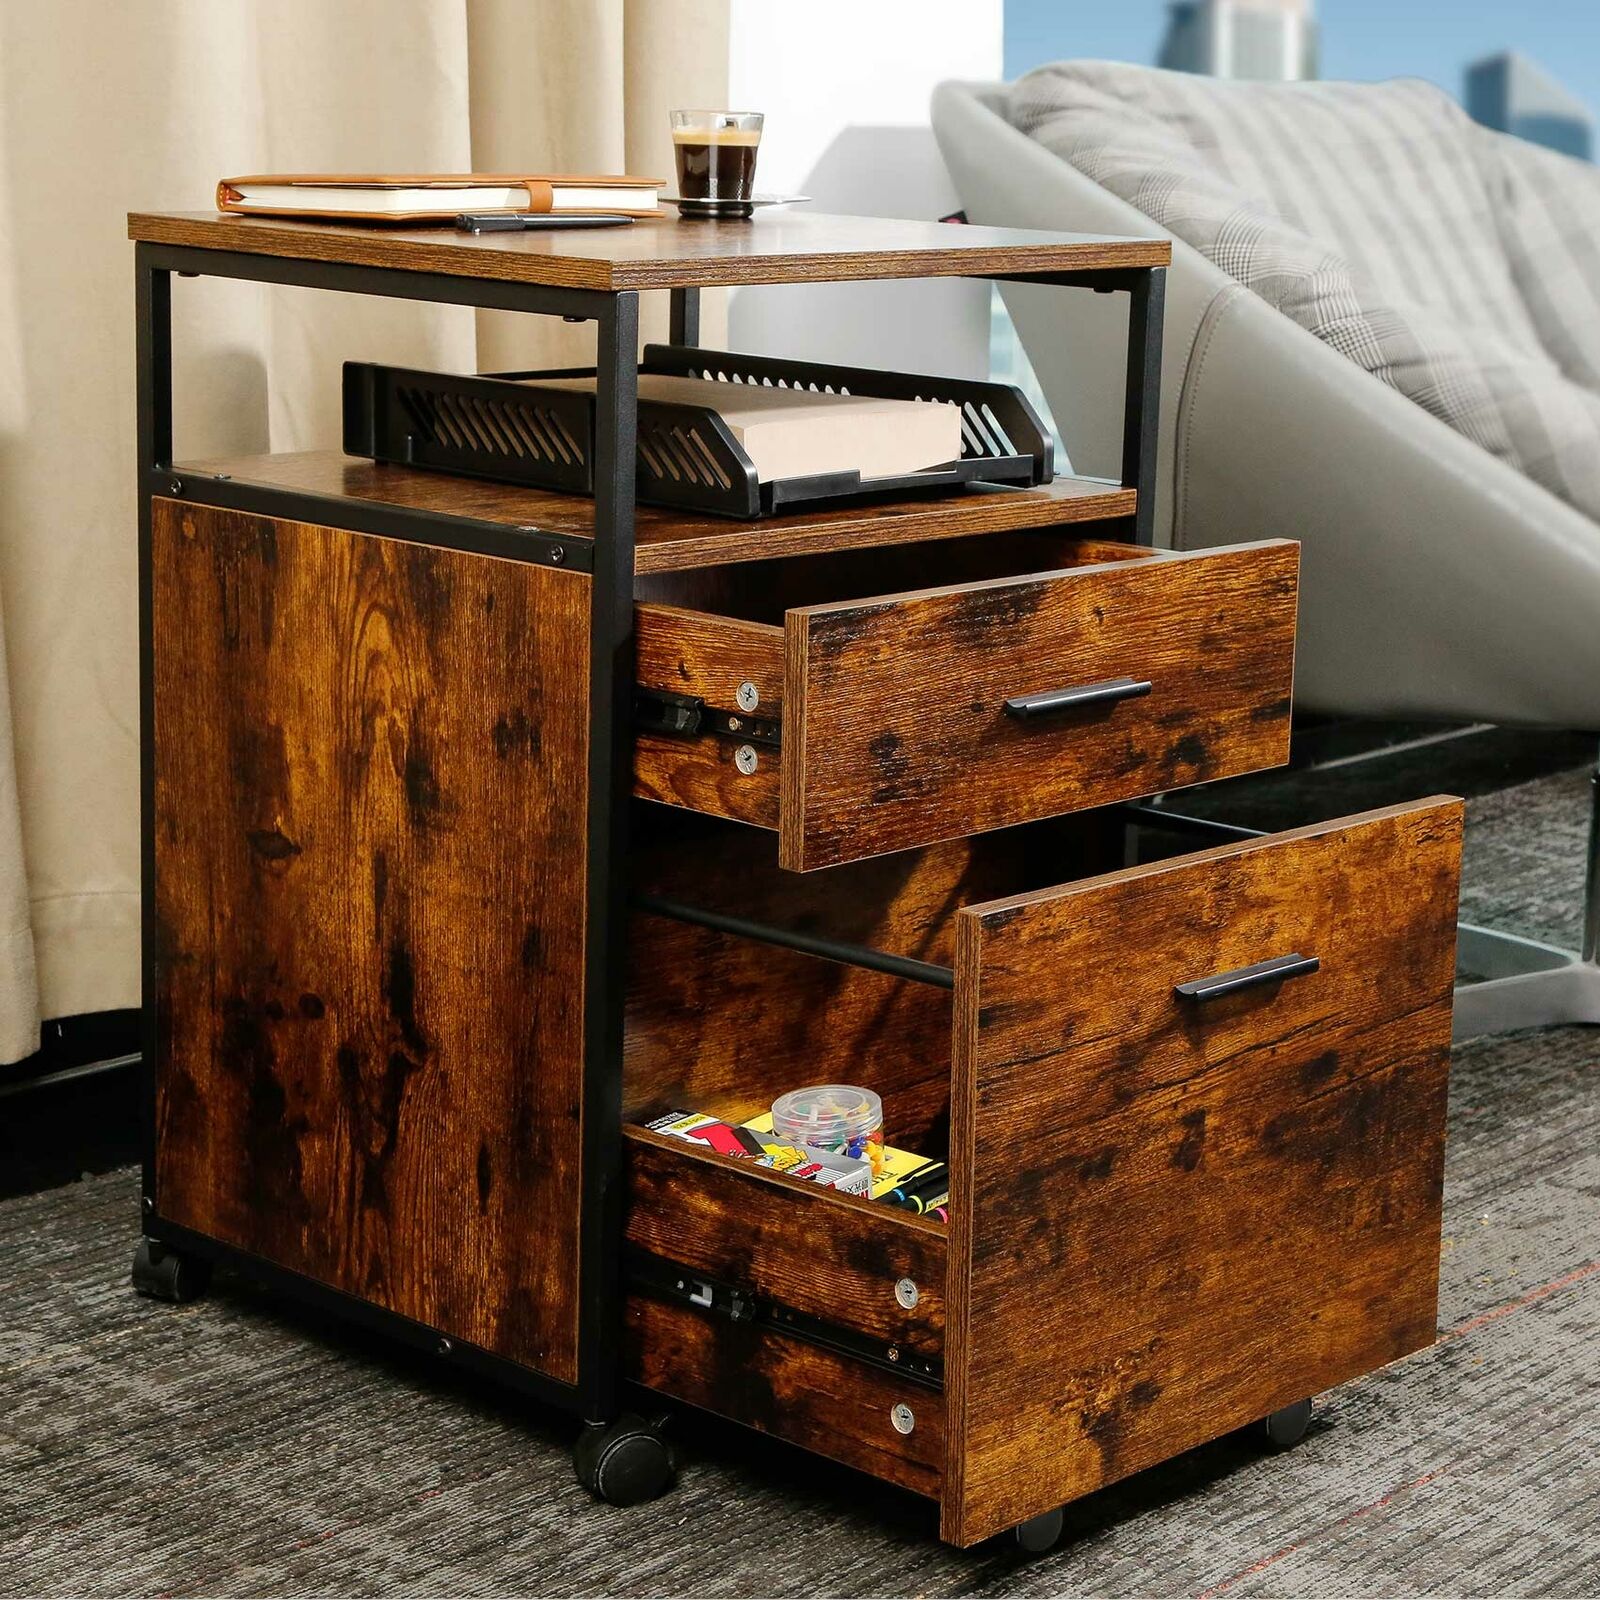 Wood Nighstand Side Table Furniture Rustic Storage End Table W/2 Drawers & Wheel